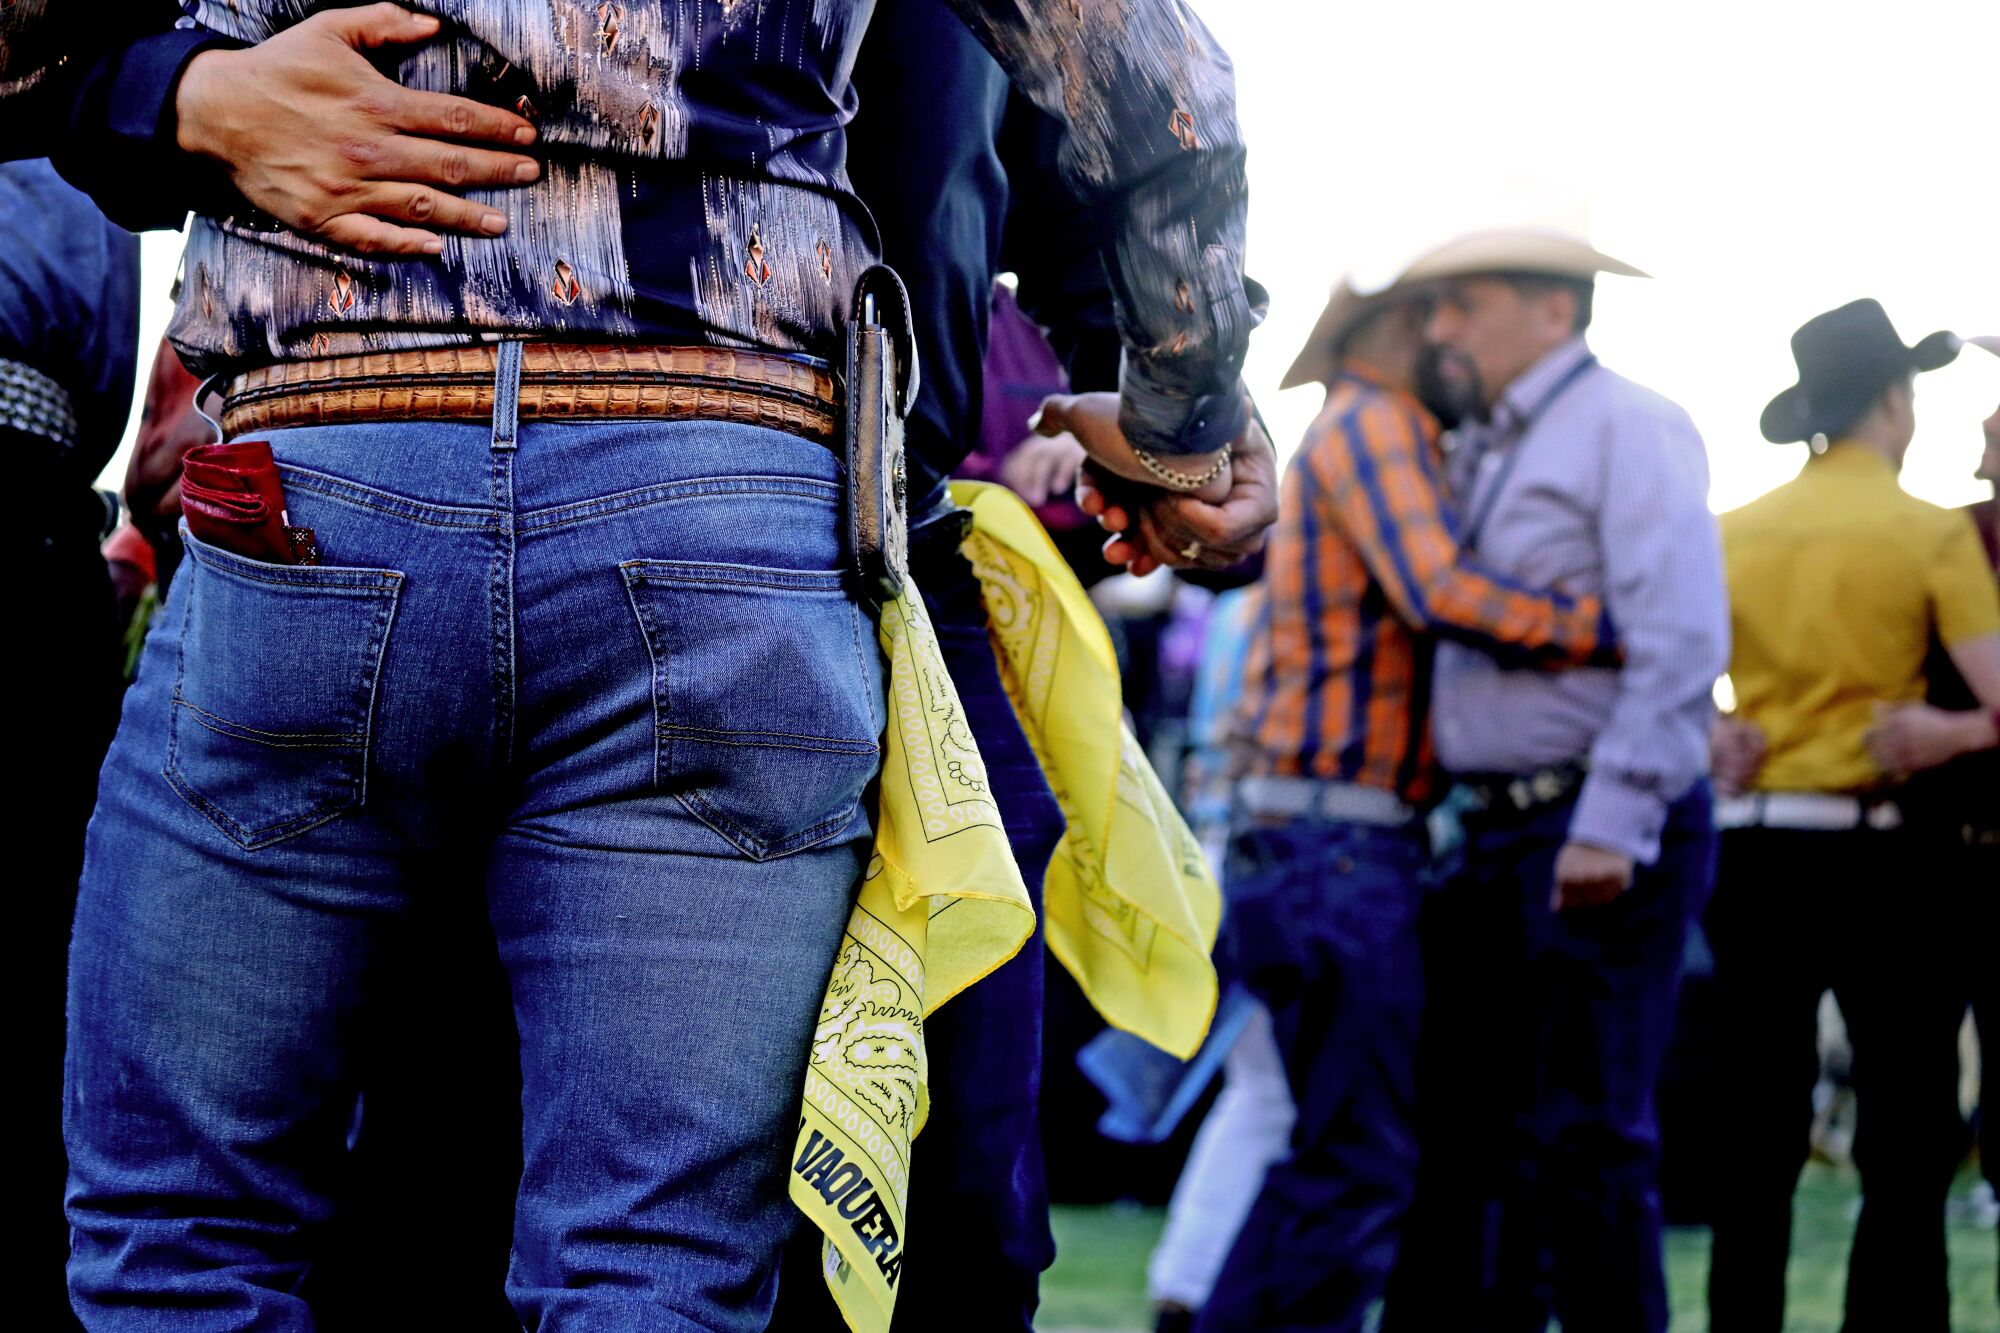 Men in jeans and cowboy hats dance close together during the day at an outdoor venue.